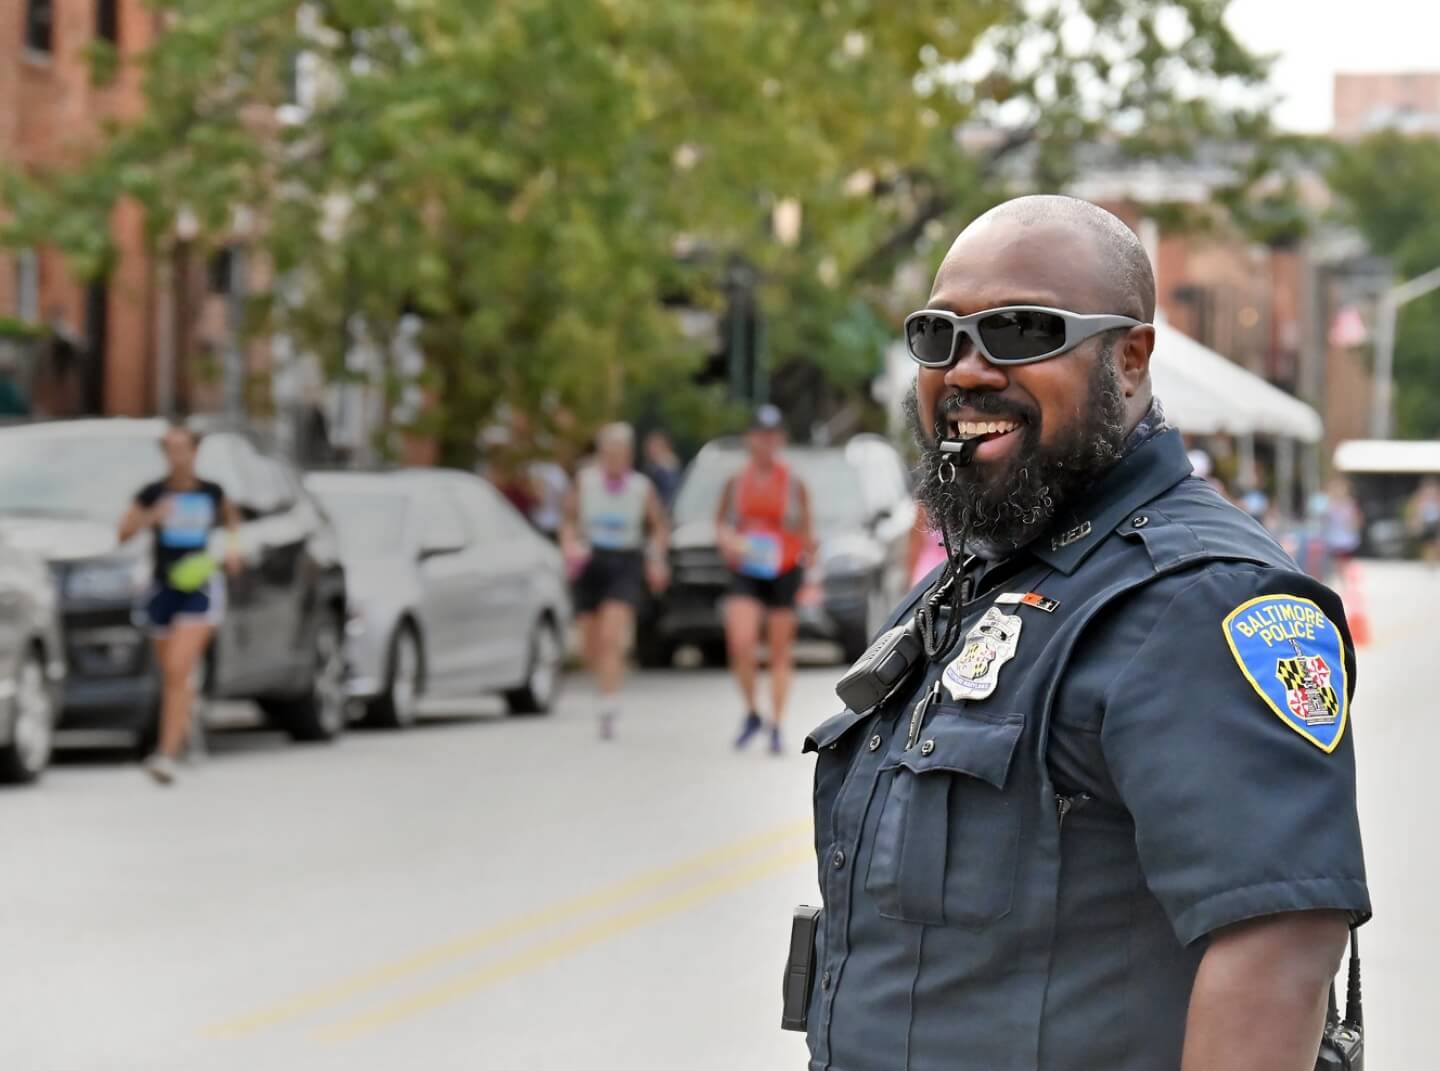 Baltimore Police Officer smiles, wearing sunglasses and holding a traffic control whistle in his mouth